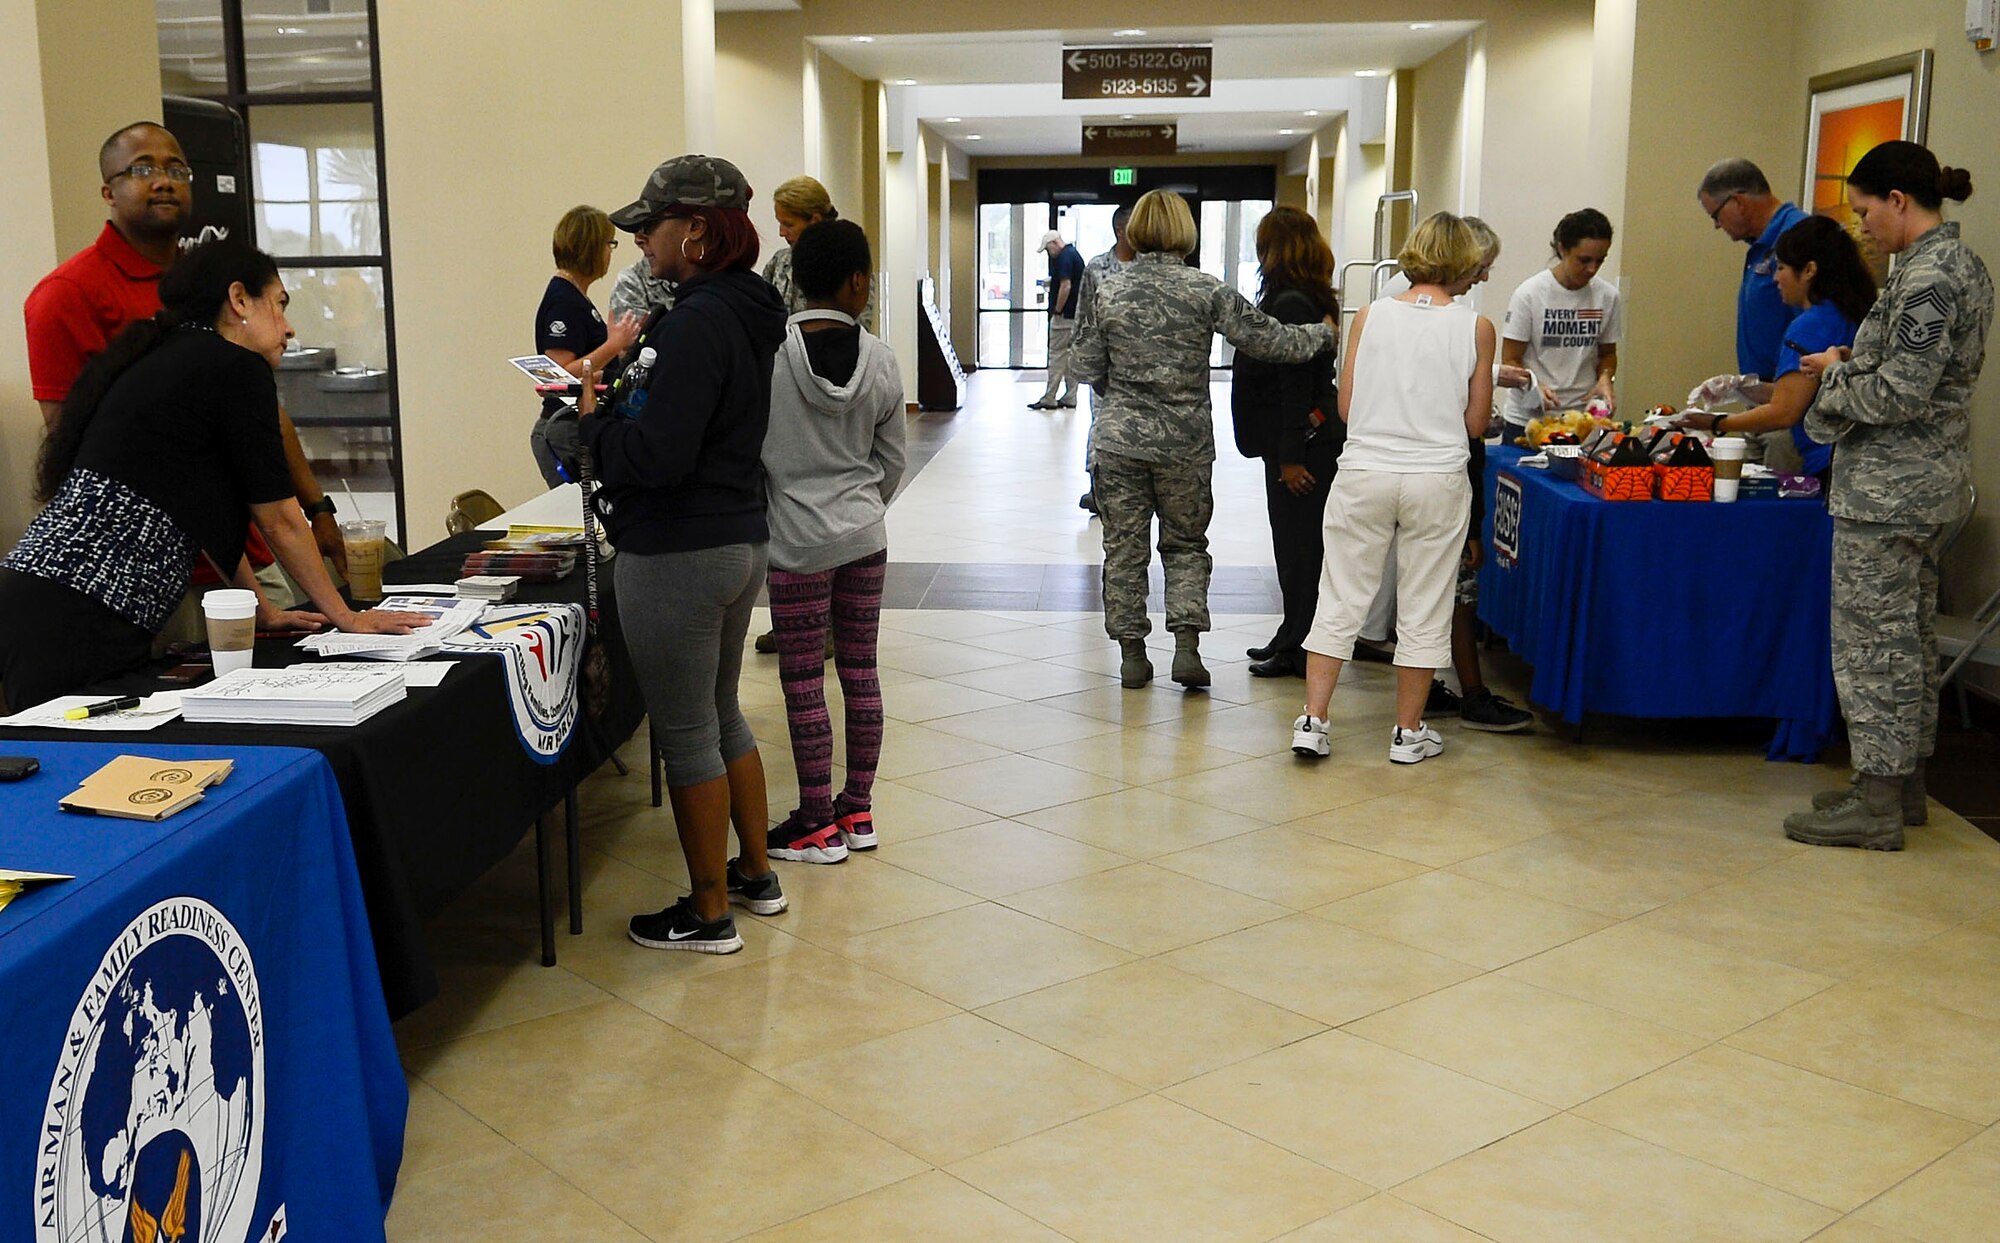 Members of the 6th Force Support Squadron and the United Services Organizations provide assistance to Hurricane Matthew evacuees Oct. 7, 2016, at MacDill Air Force Base, Fla. More than 150 evacuees traveled through MacDill’s gates seeking refuge at the MacDill Inn. (U.S. Air Force photo by Senior Airman Jenay Randolph)   